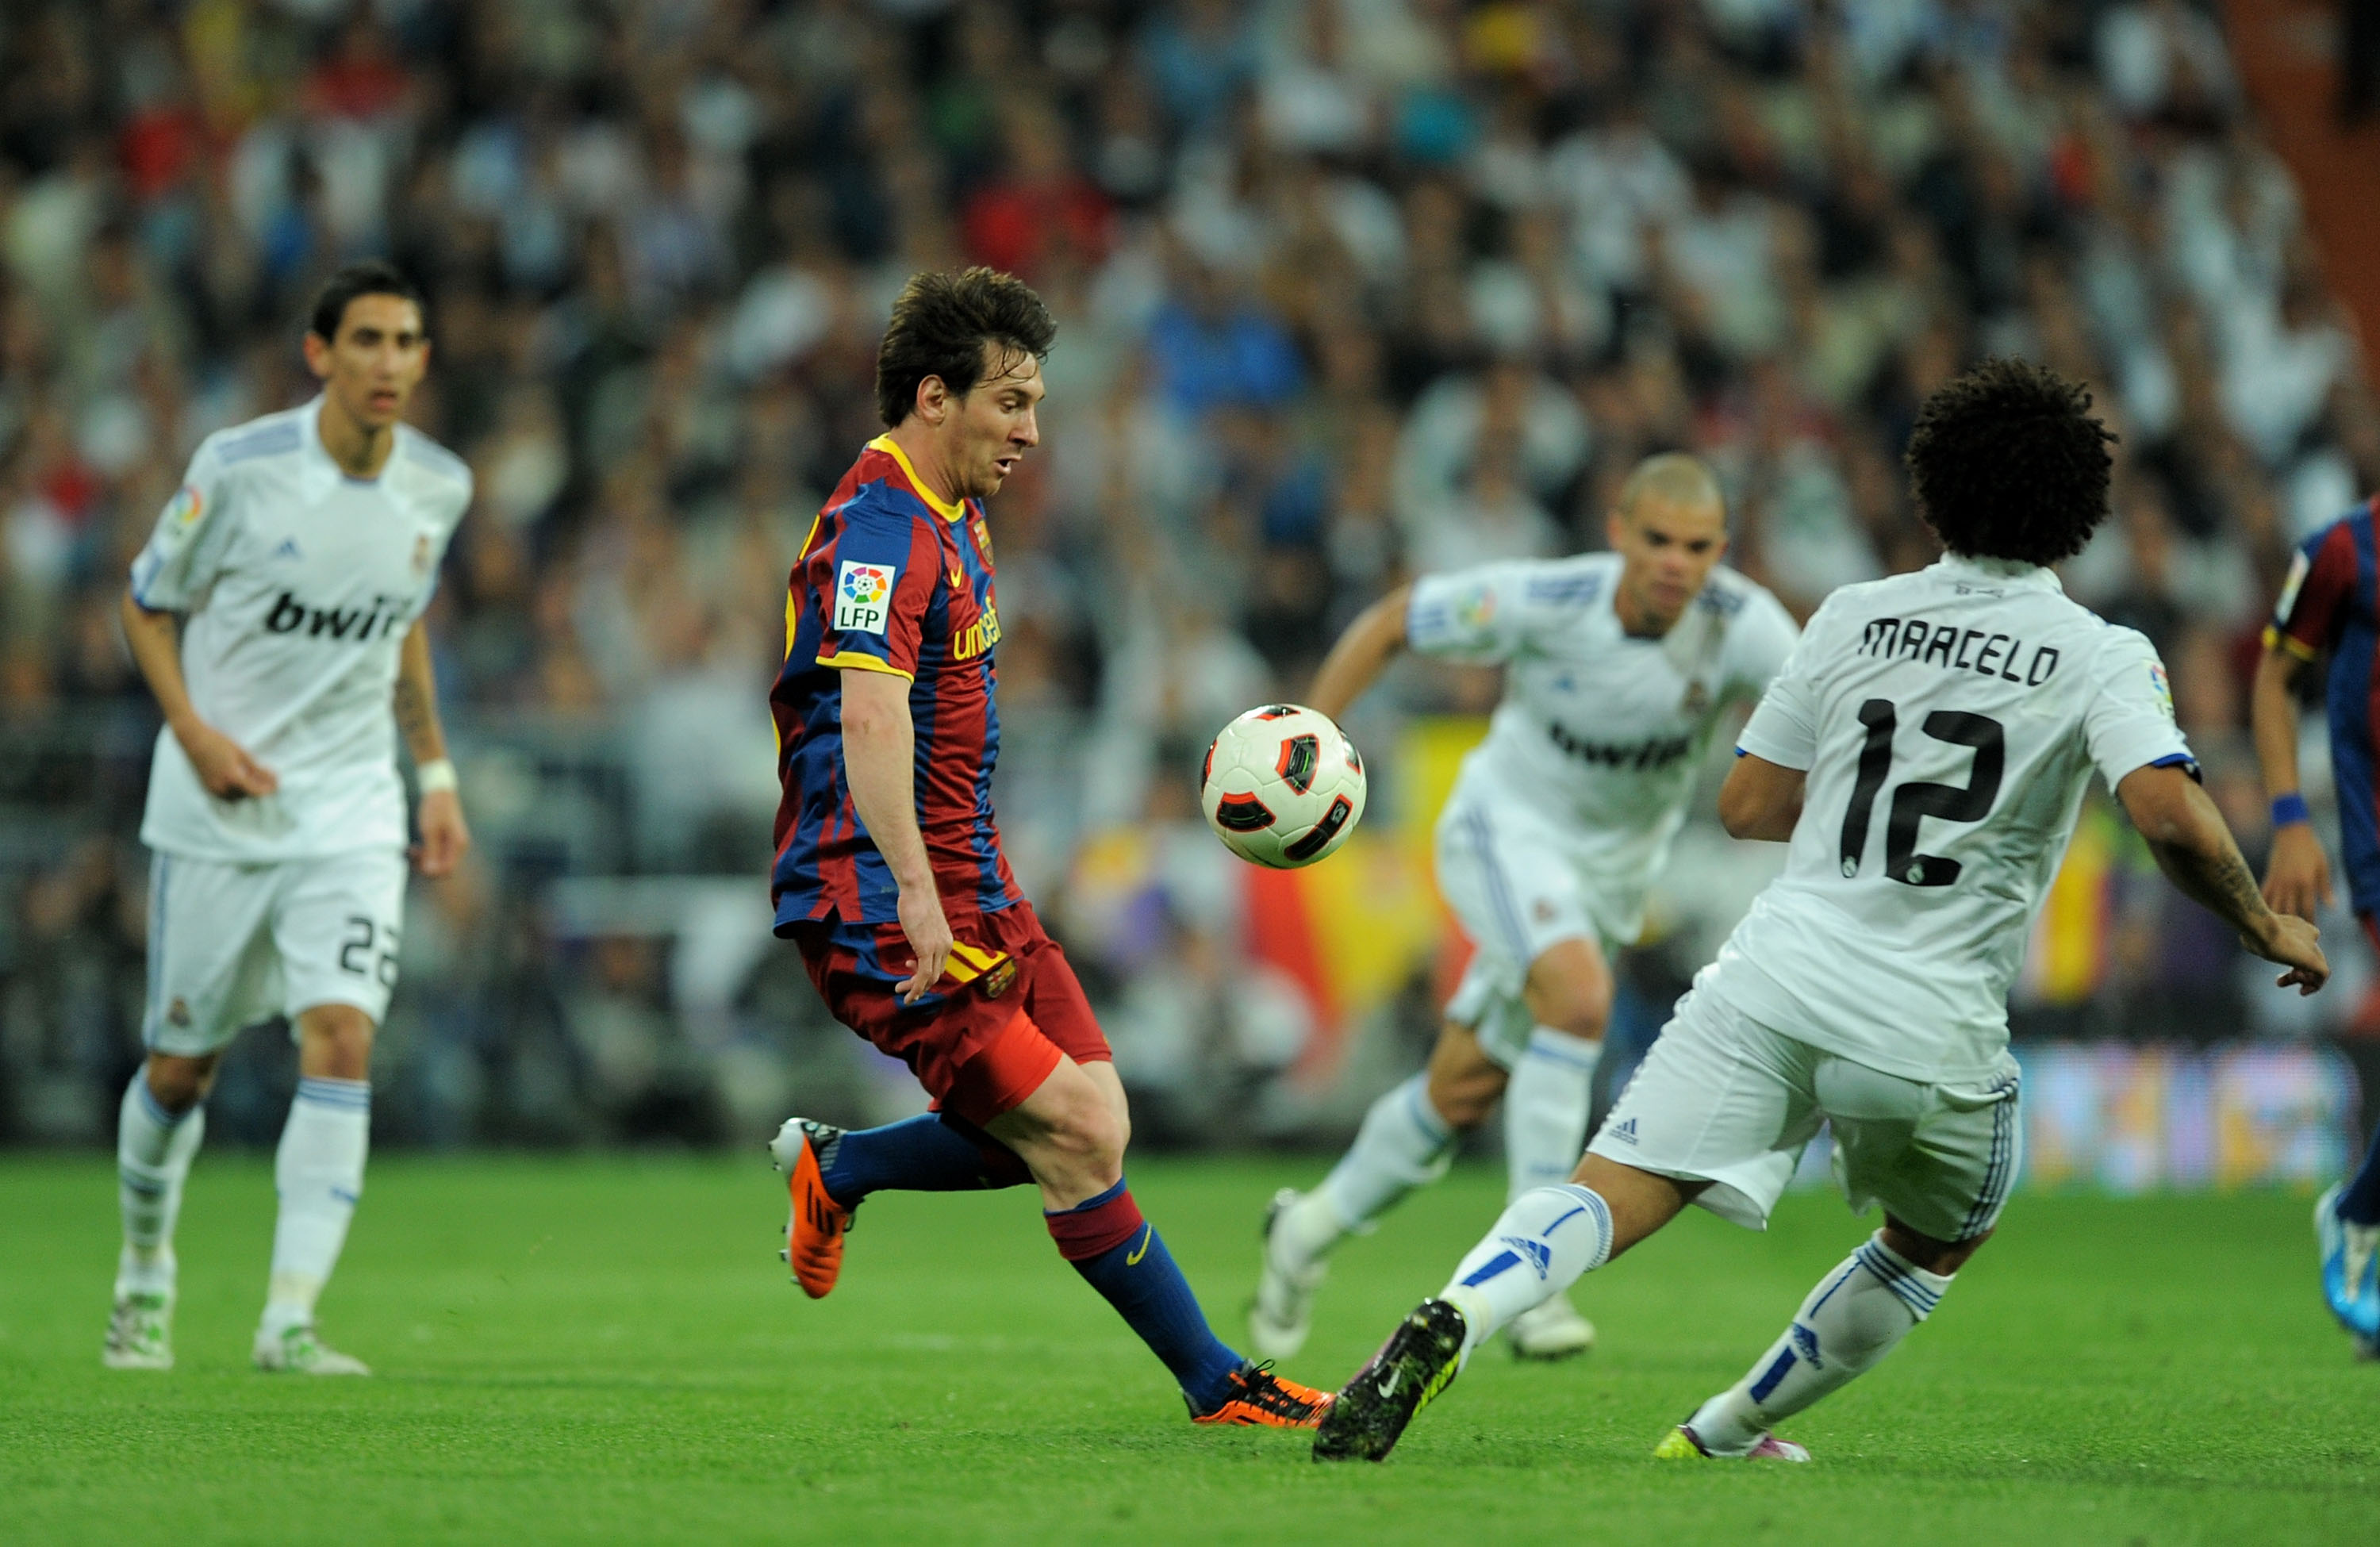 MADRID, SPAIN - APRIL 16:  Lionel Messi (C) of Barcelona takes on Marcelo of Real Madrid during the La Liga match between Real Madrid and Barcelona at Estadio Santiago Bernabeu on April 16, 2011 in Madrid, Spain.  (Photo by Denis Doyle/Getty Images)